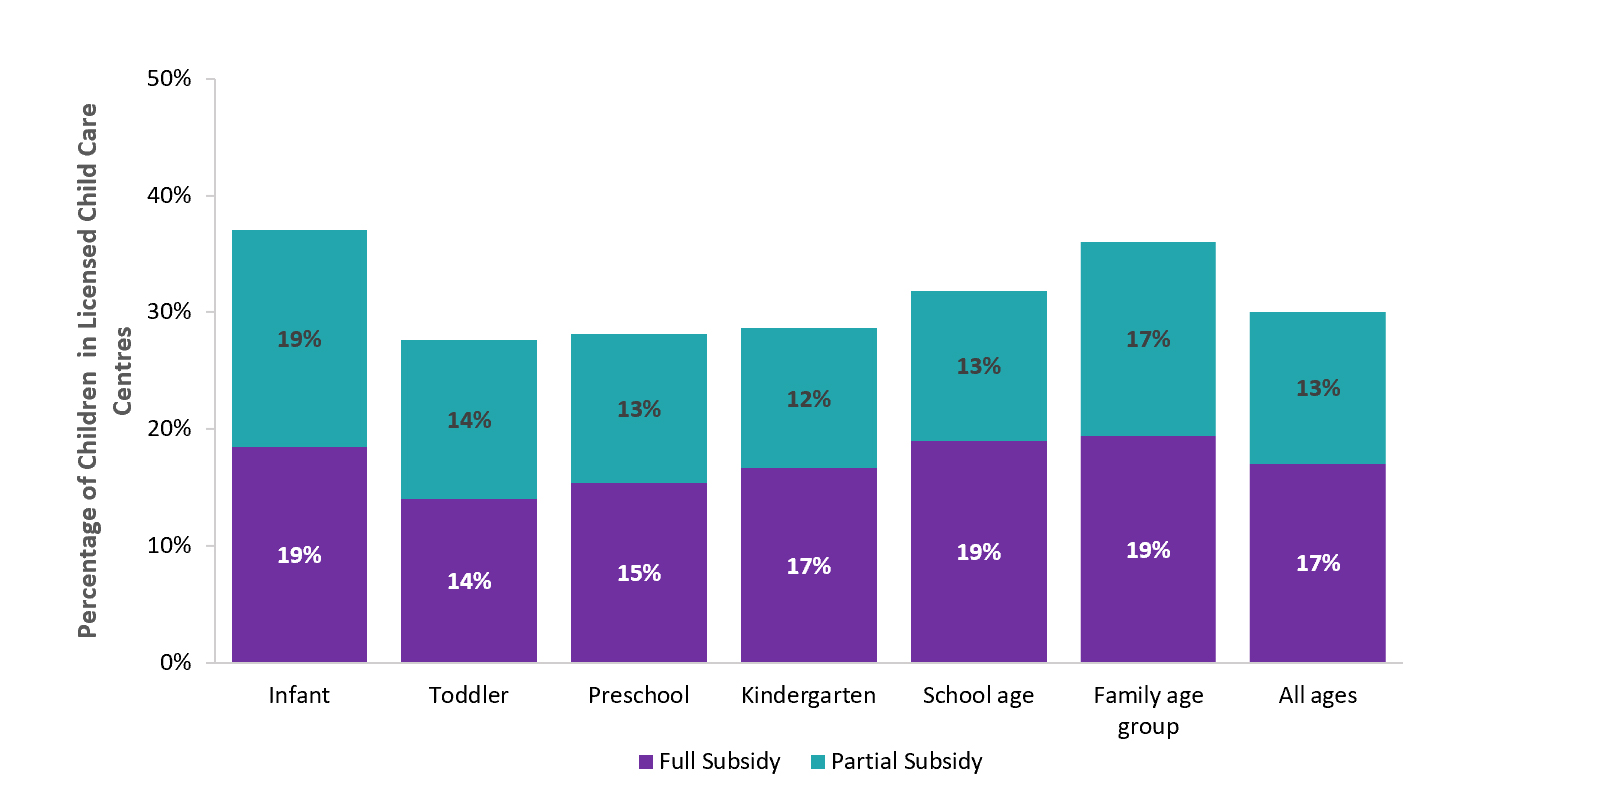 Percentage of children in licensed child care centres receiving a full or partial subsidy by age, 2021